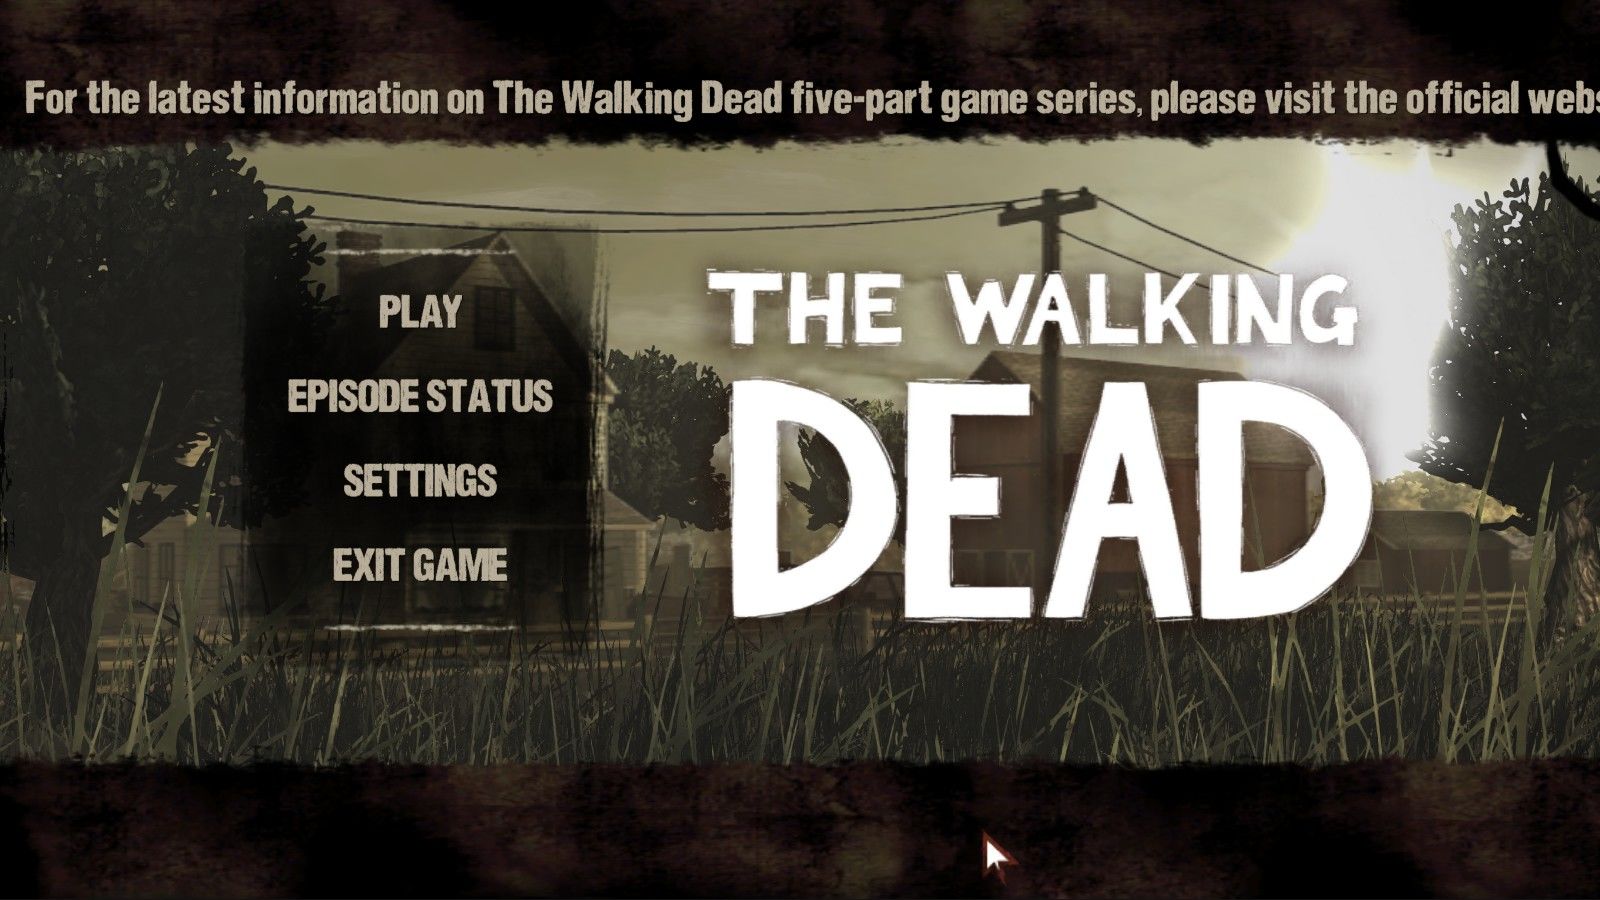 The Walking Dead - Xbox 360 Game